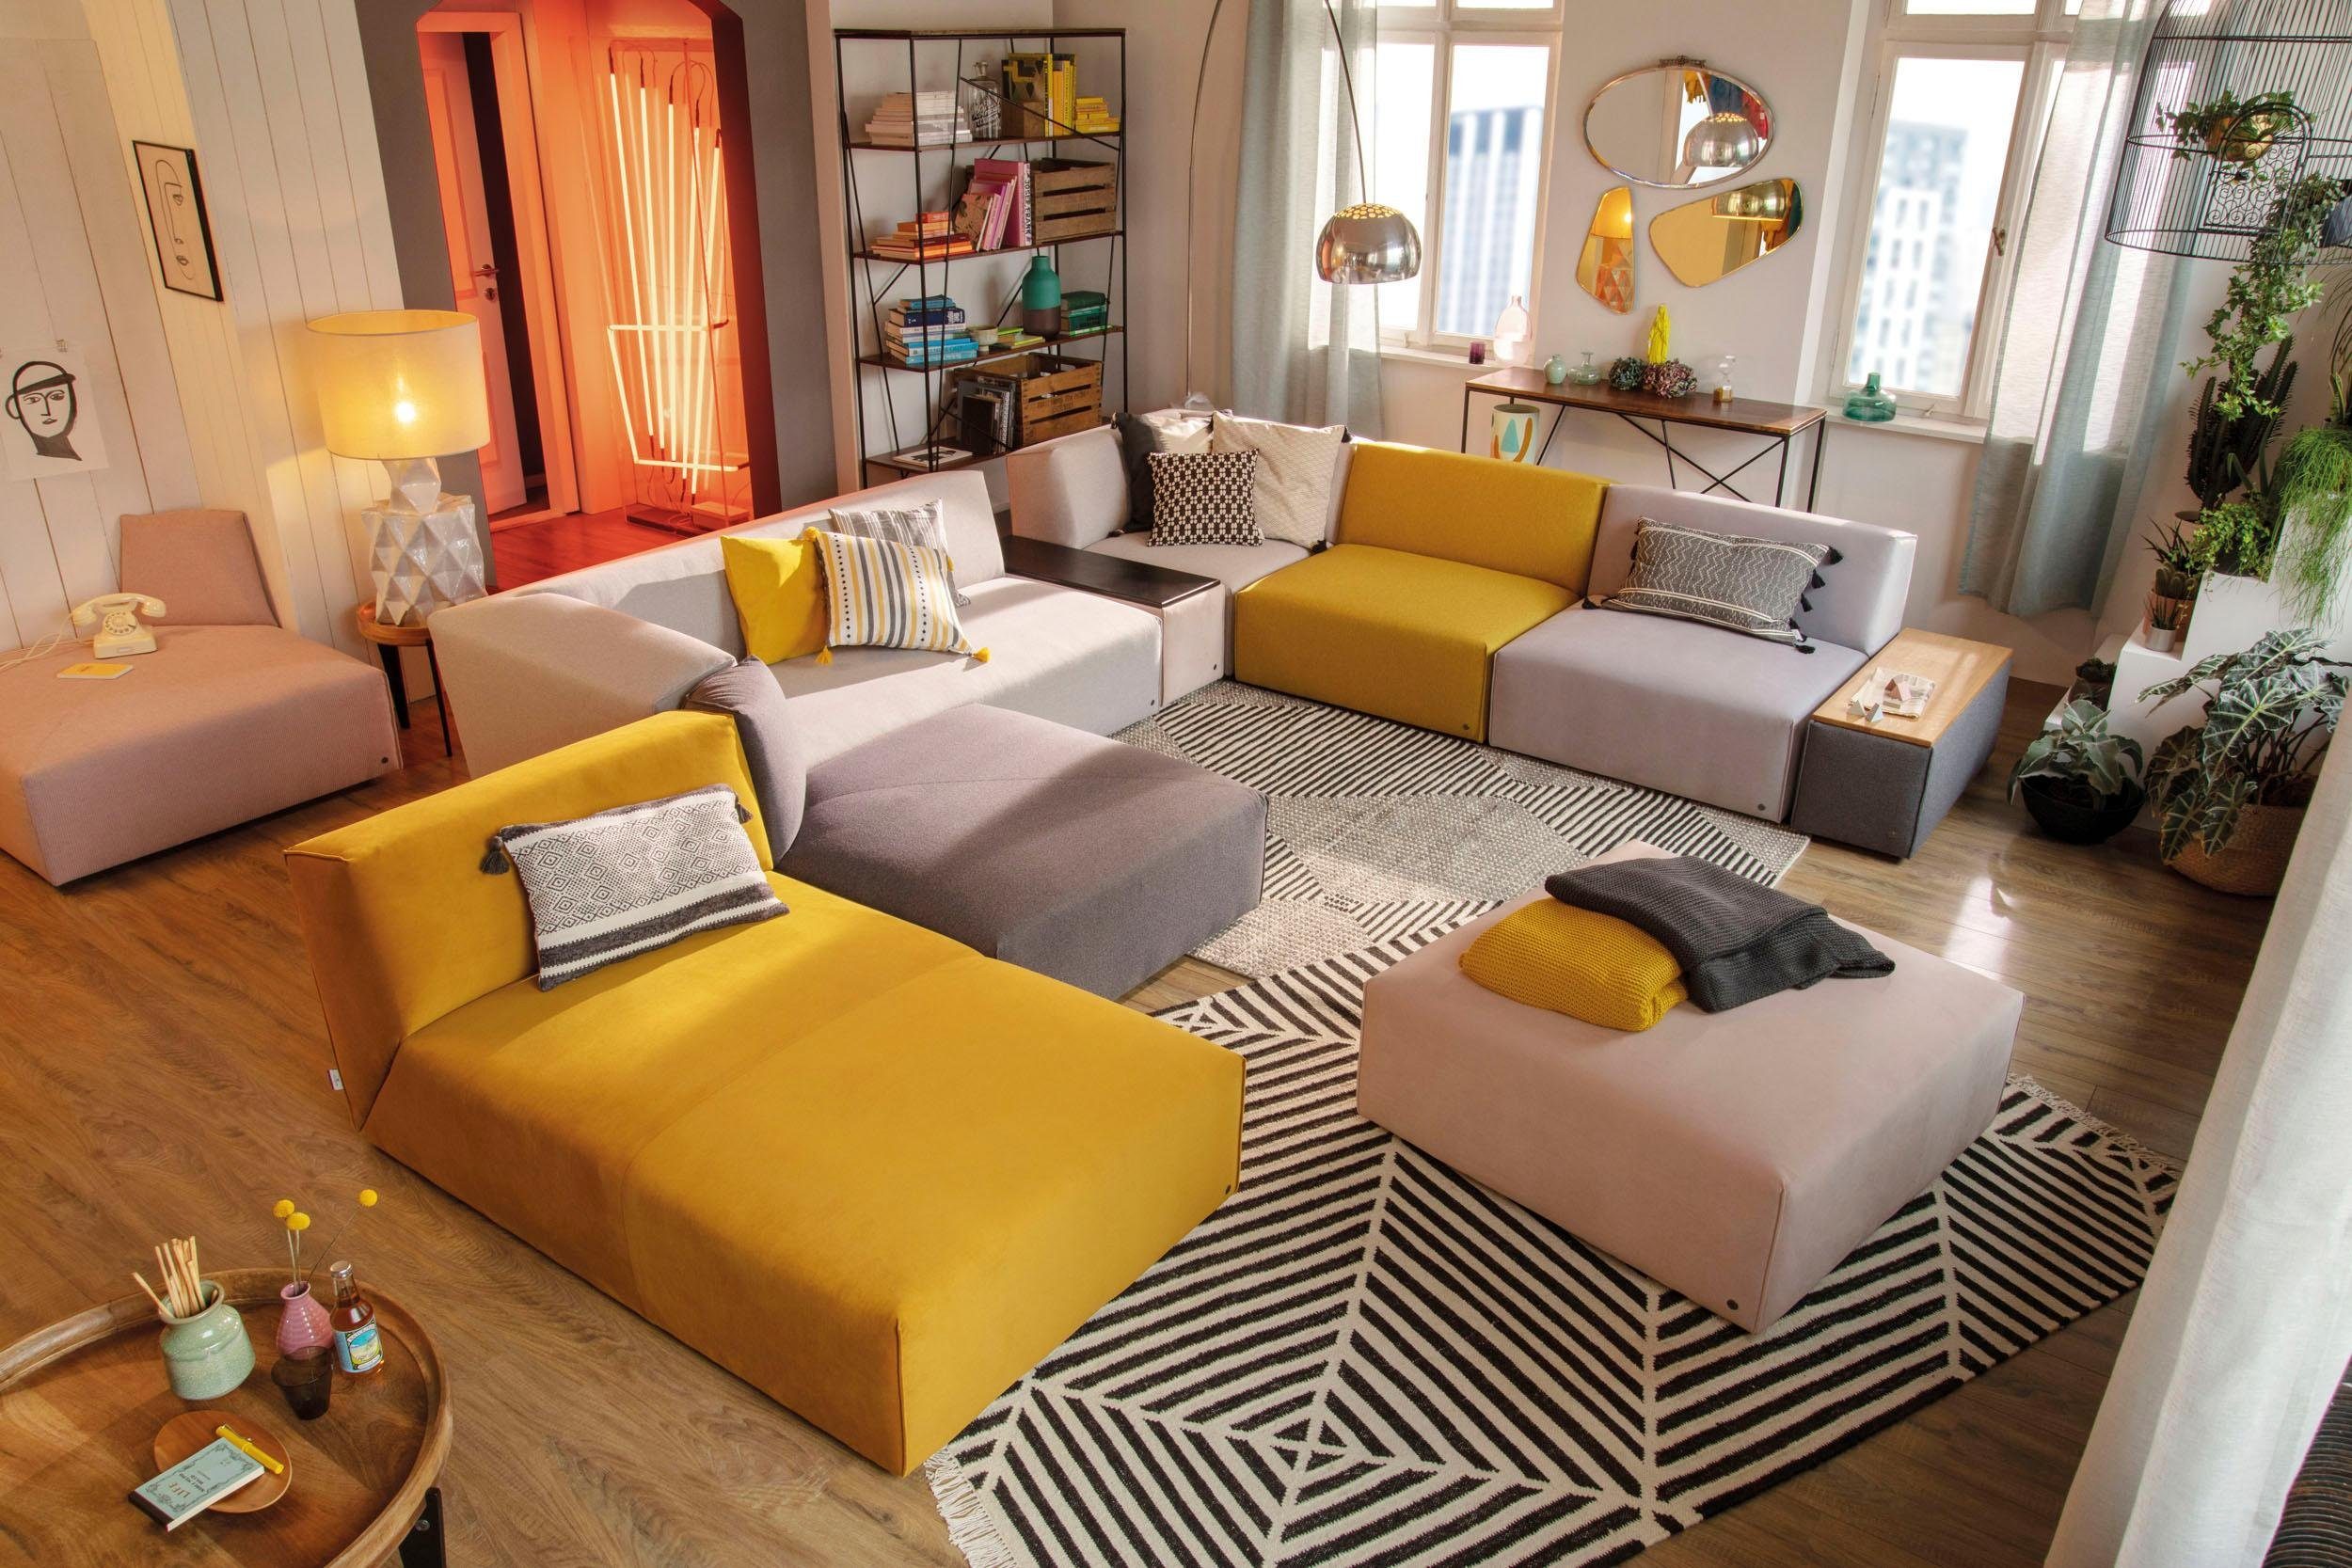 TOM mit ELEMENTS, Bettfunktion Sofaelement HOME wahlweise Chaiselongue TAILOR